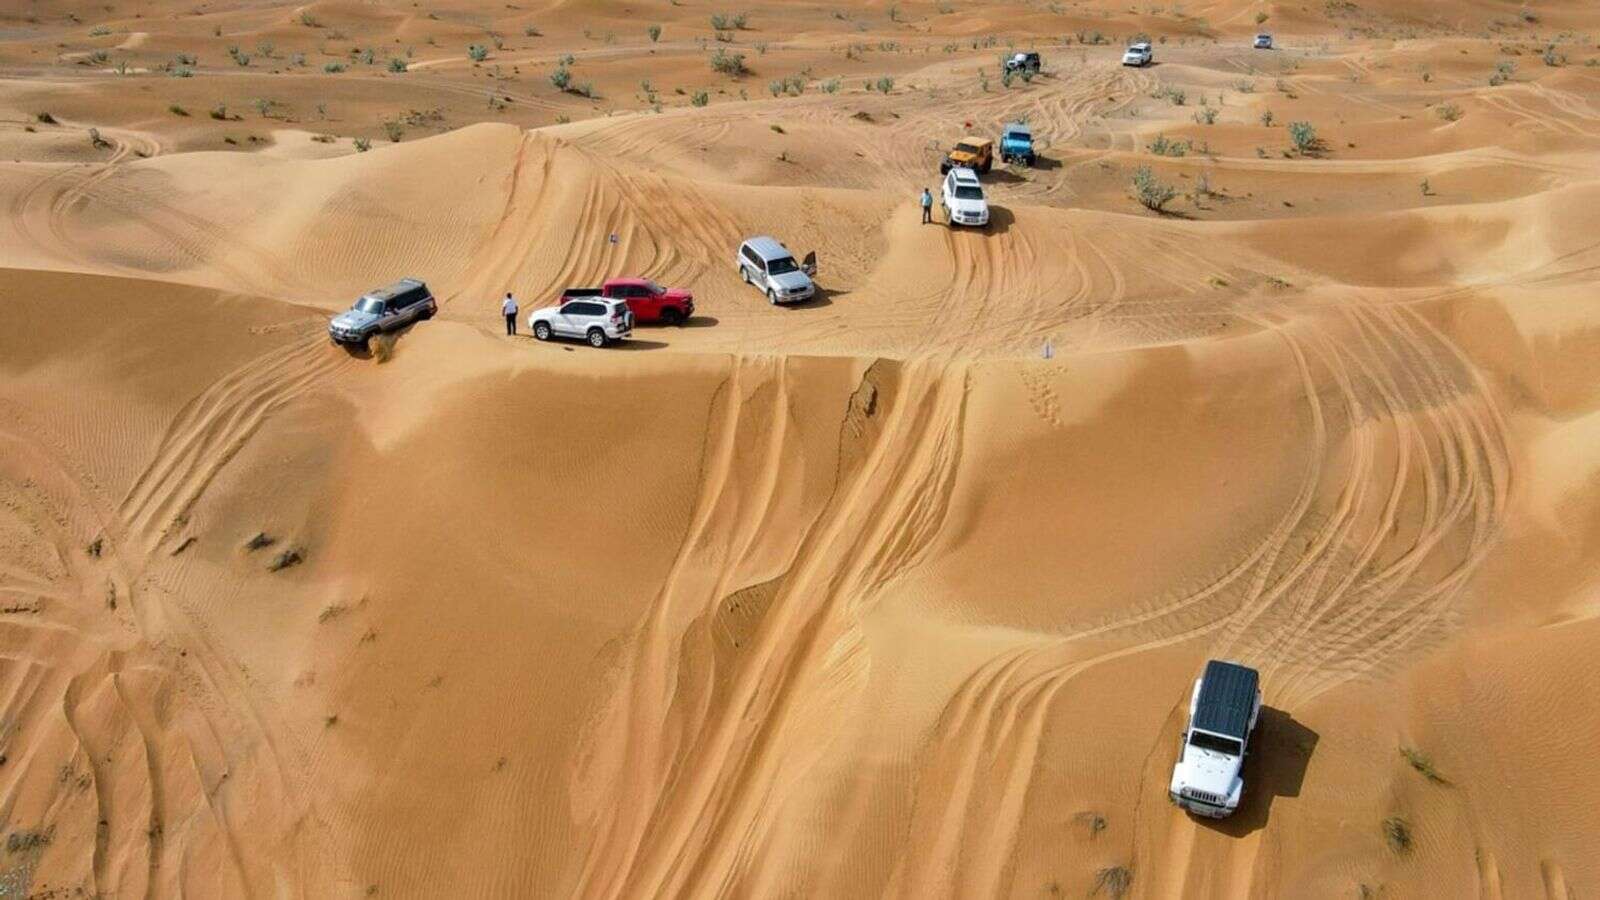 how to, off-roading in uae: how to avoid dh2,000 fine, 60 days in jail